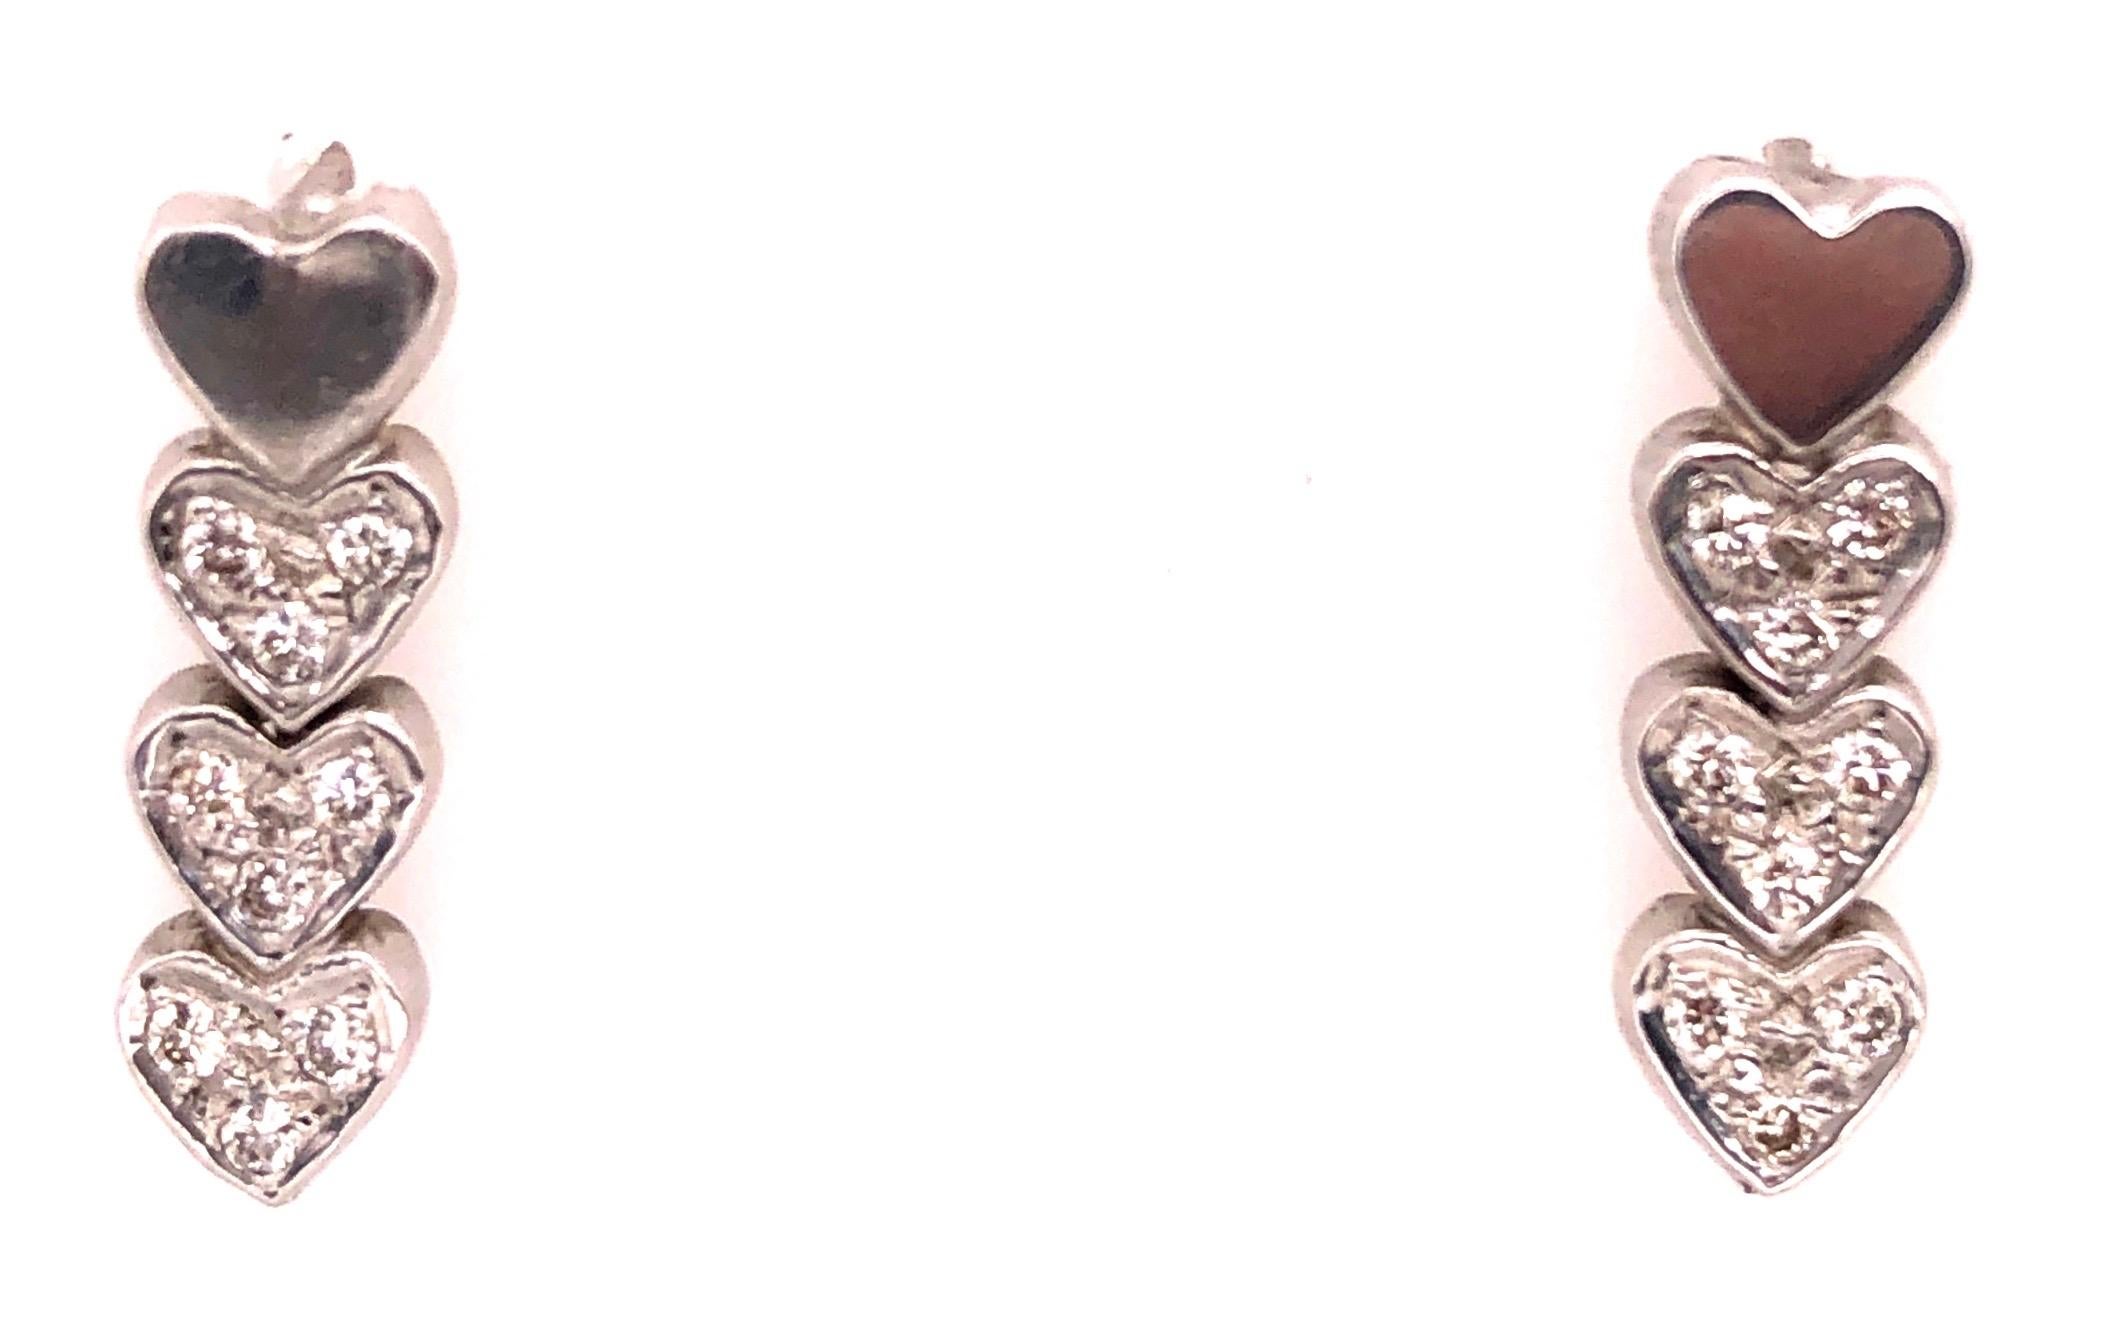 14Kt Heart Screw Back Earrings with 18 Diamonds 2 grams total weight.